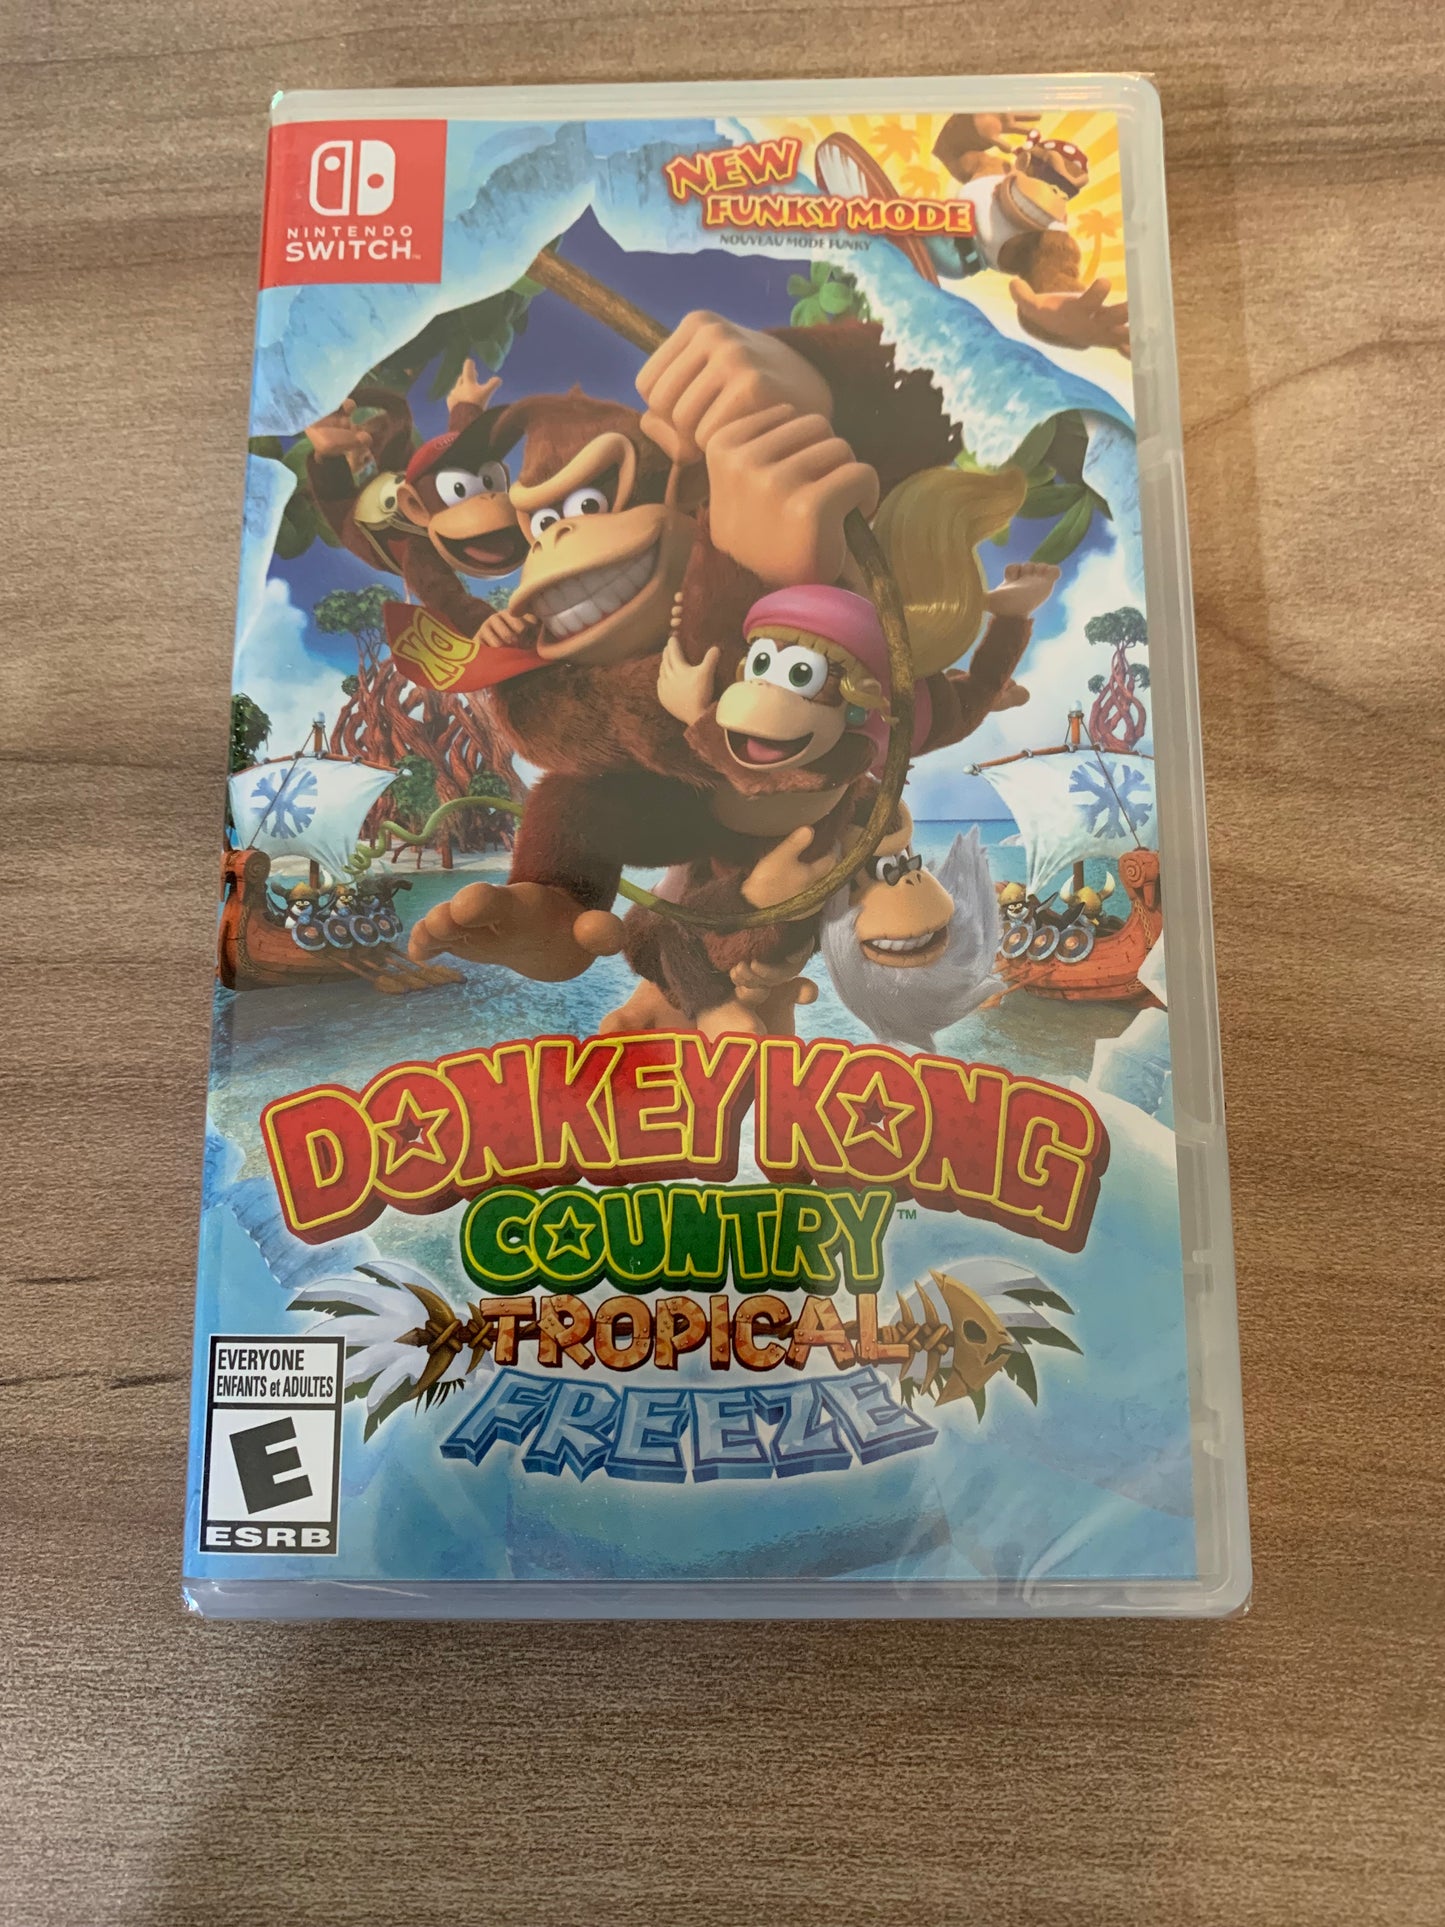 PiXEL-RETRO.COM : NINTENDO SWITCH NEW SEALED IN BOX COMPLETE MANUAL GAME NTSC DONKEY KONG COUNTRY TROPICAL FREEZE